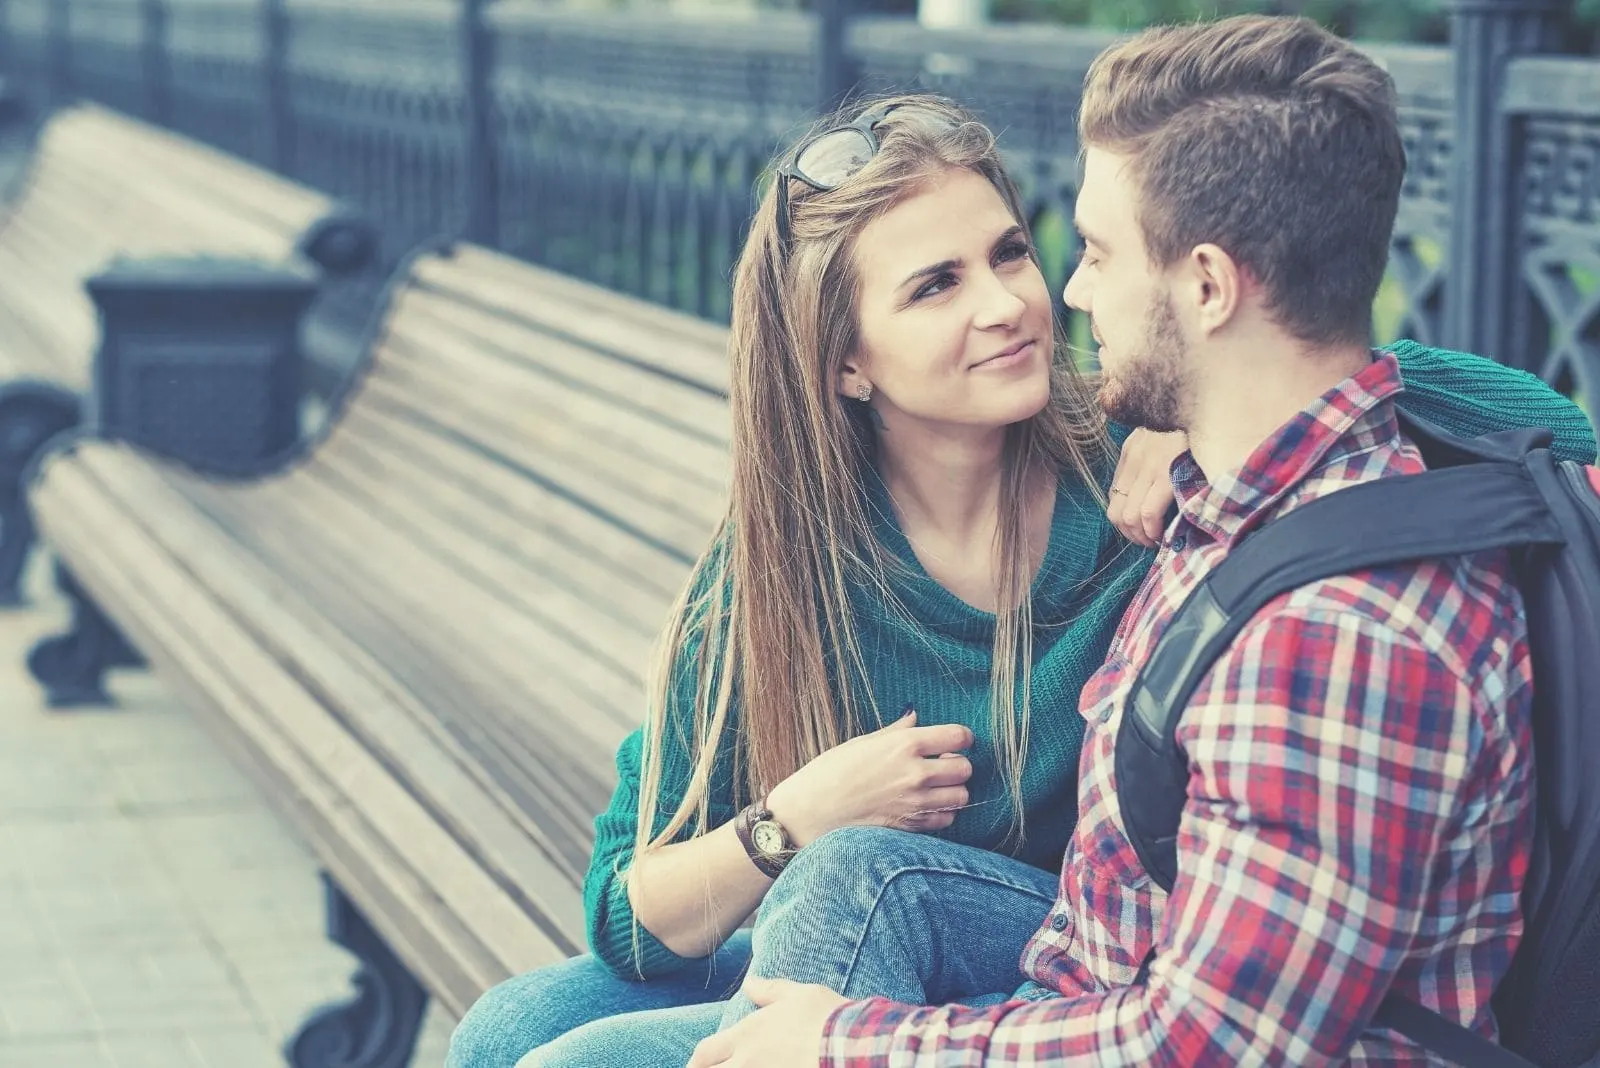 lovely sweet couple sitting in a bench outdoors talking